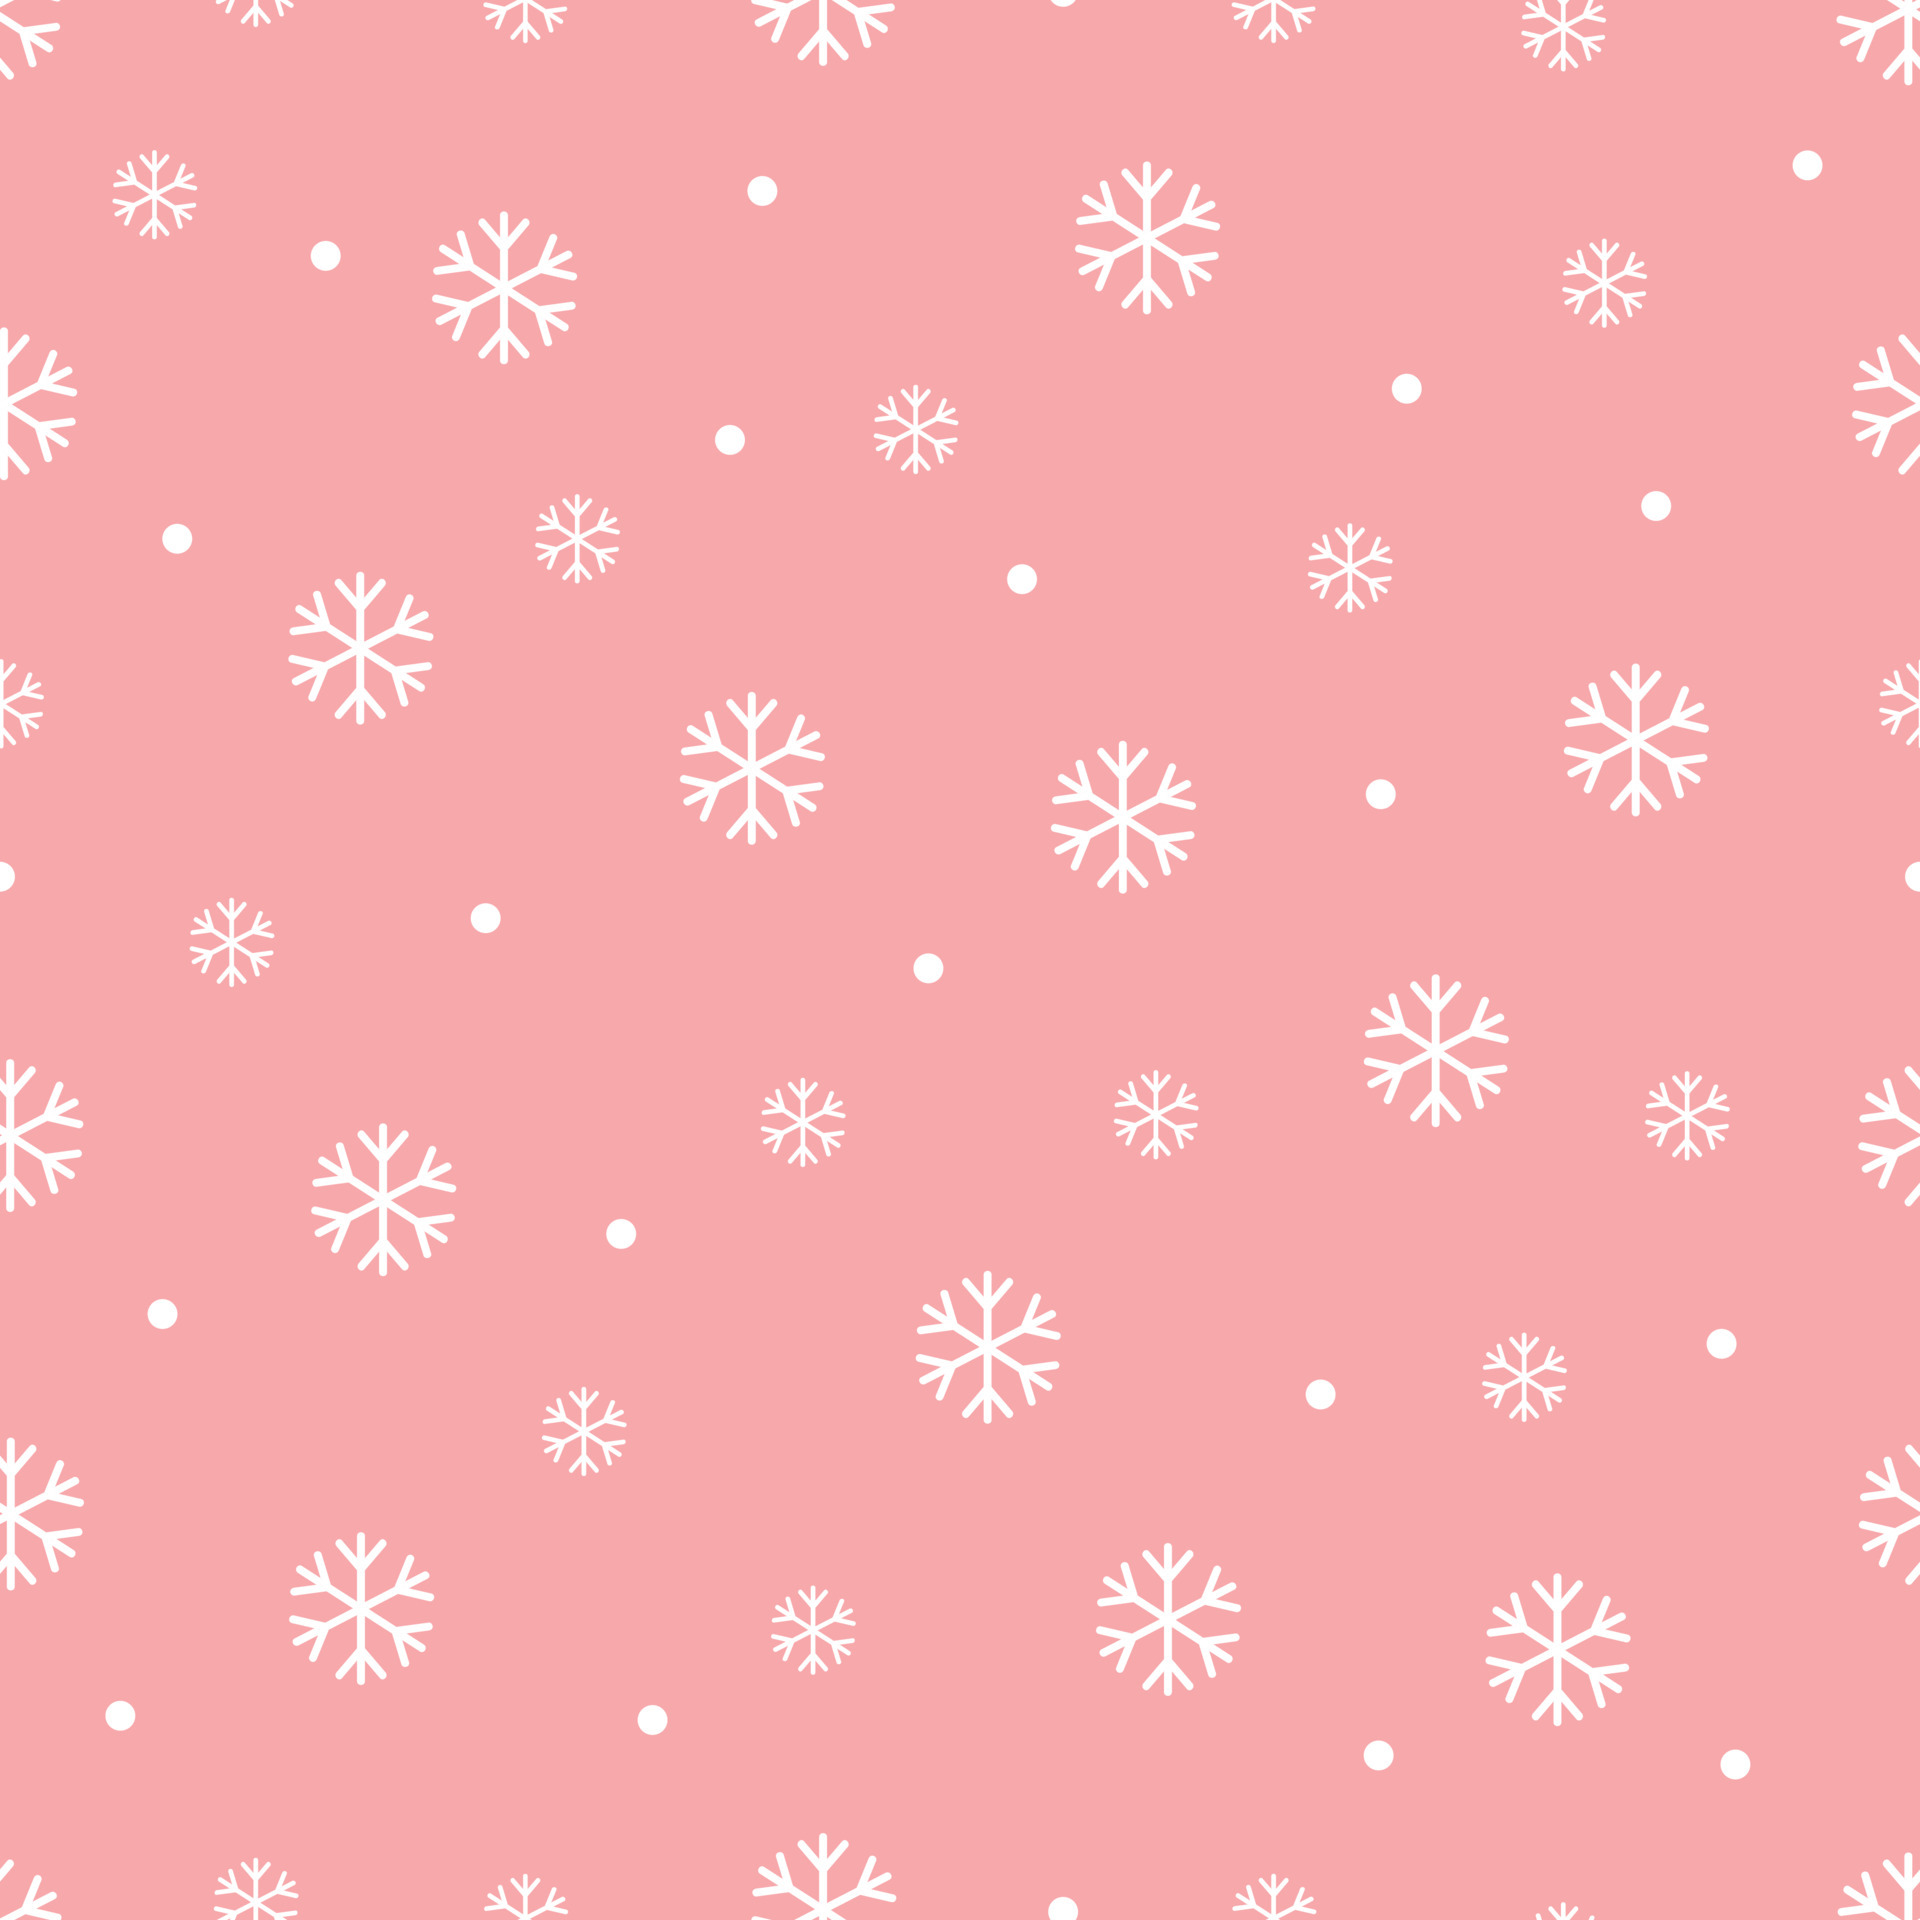 Seamless Christmas pattern. White snowflakes on pink background. vector design for print, decorative wallpaper, Christmas celebration